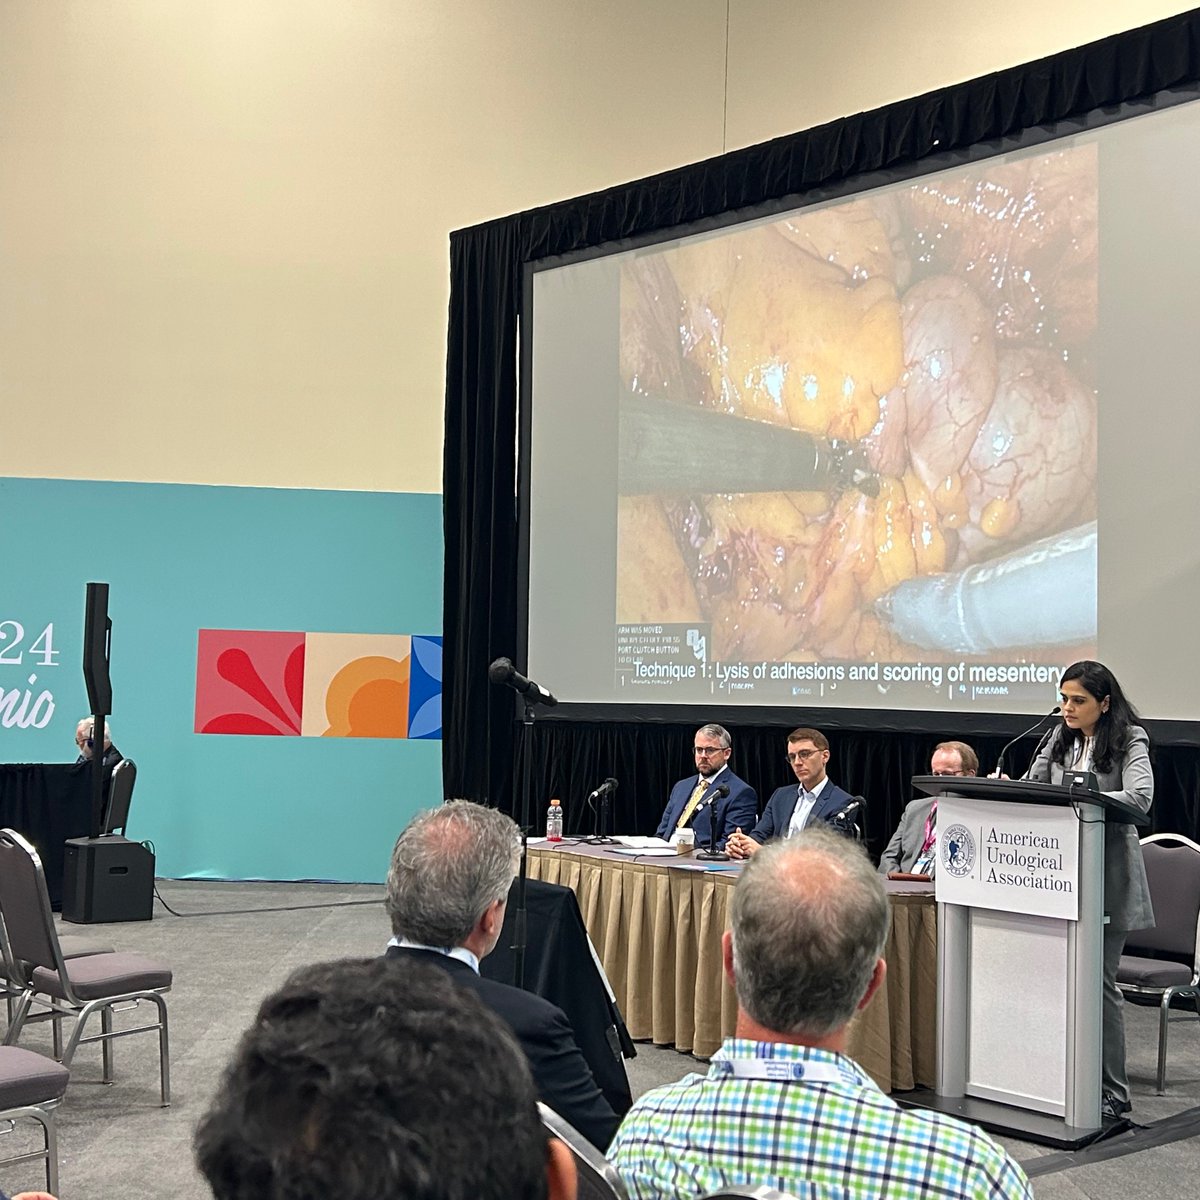 Had an excellent video abstract session at AUA 24 describing the difficult intracorporeal neobladder and techniques to bring the ileum down. A huge shout-out to my mentors Peter Wiklund @MehrazinMD @DrJohnSfakianos for innovating these brilliant strategies! #AUA24